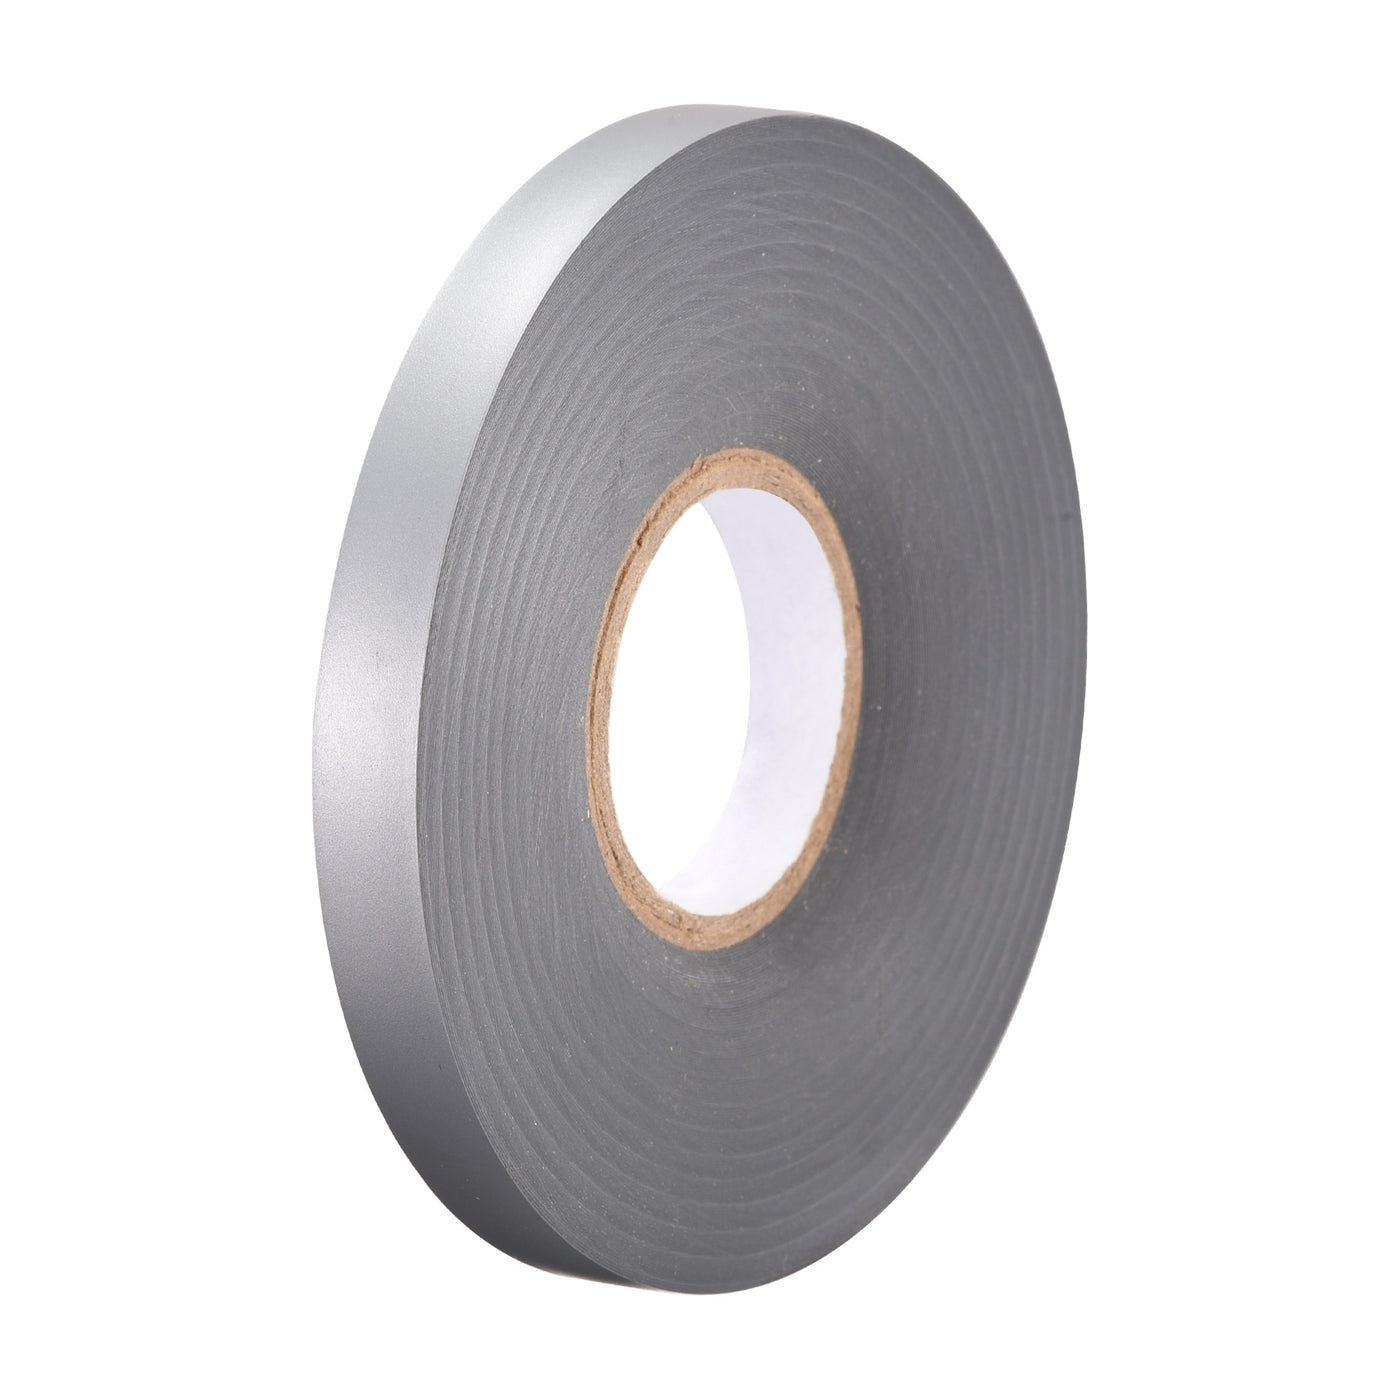 Uxcell Uxcell Insulating Tape 80mm Width 26M Long 0.26mm Thick PVC Electrical Tape Grey